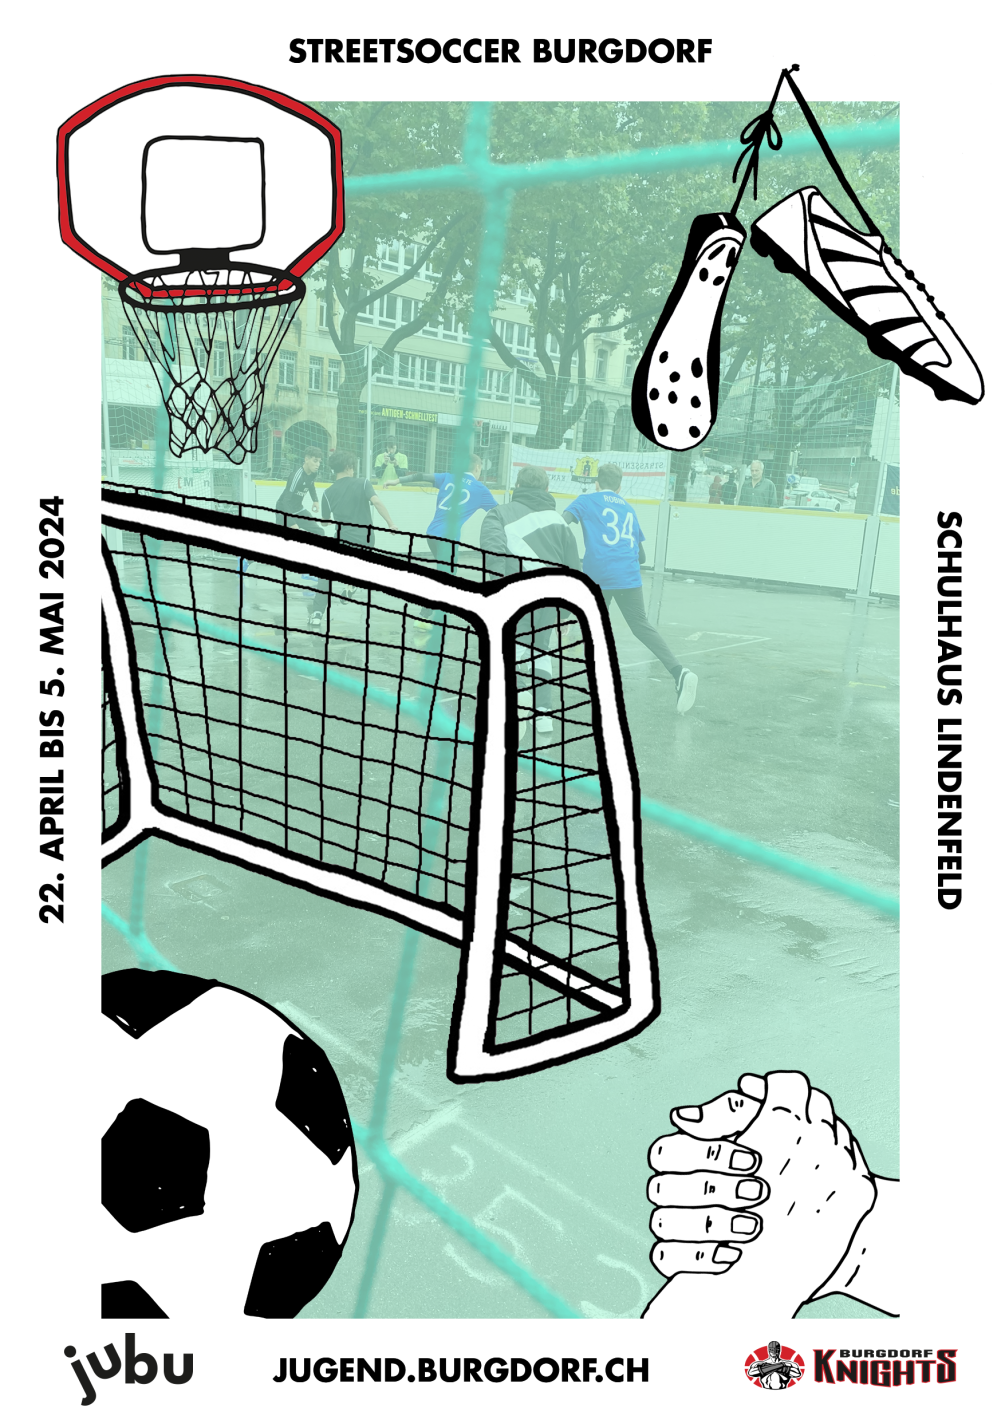 Streetsoccer Burgdorf